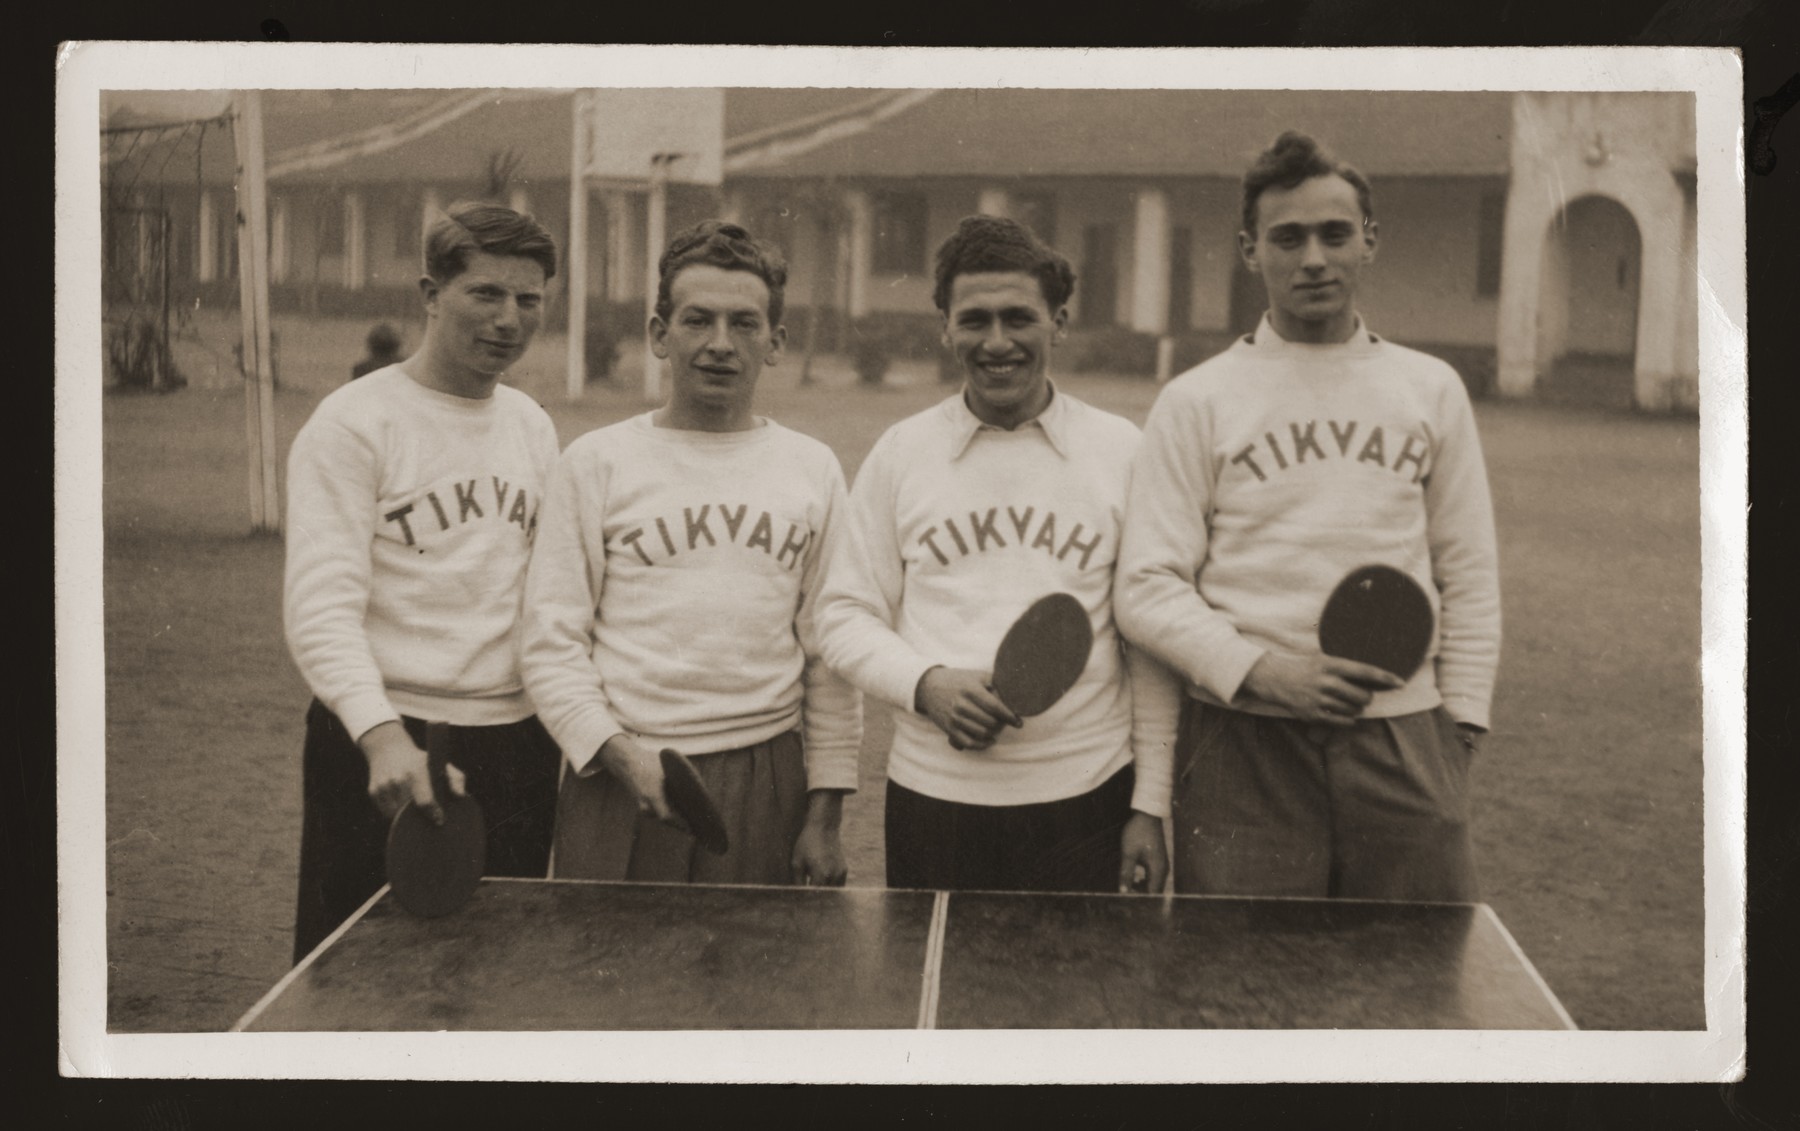 Group portrait of members of the Tikvah ping pong team.  

Pictured from left to right are Ilie Wacs, Werner Rosenberg and Henry Sattler.